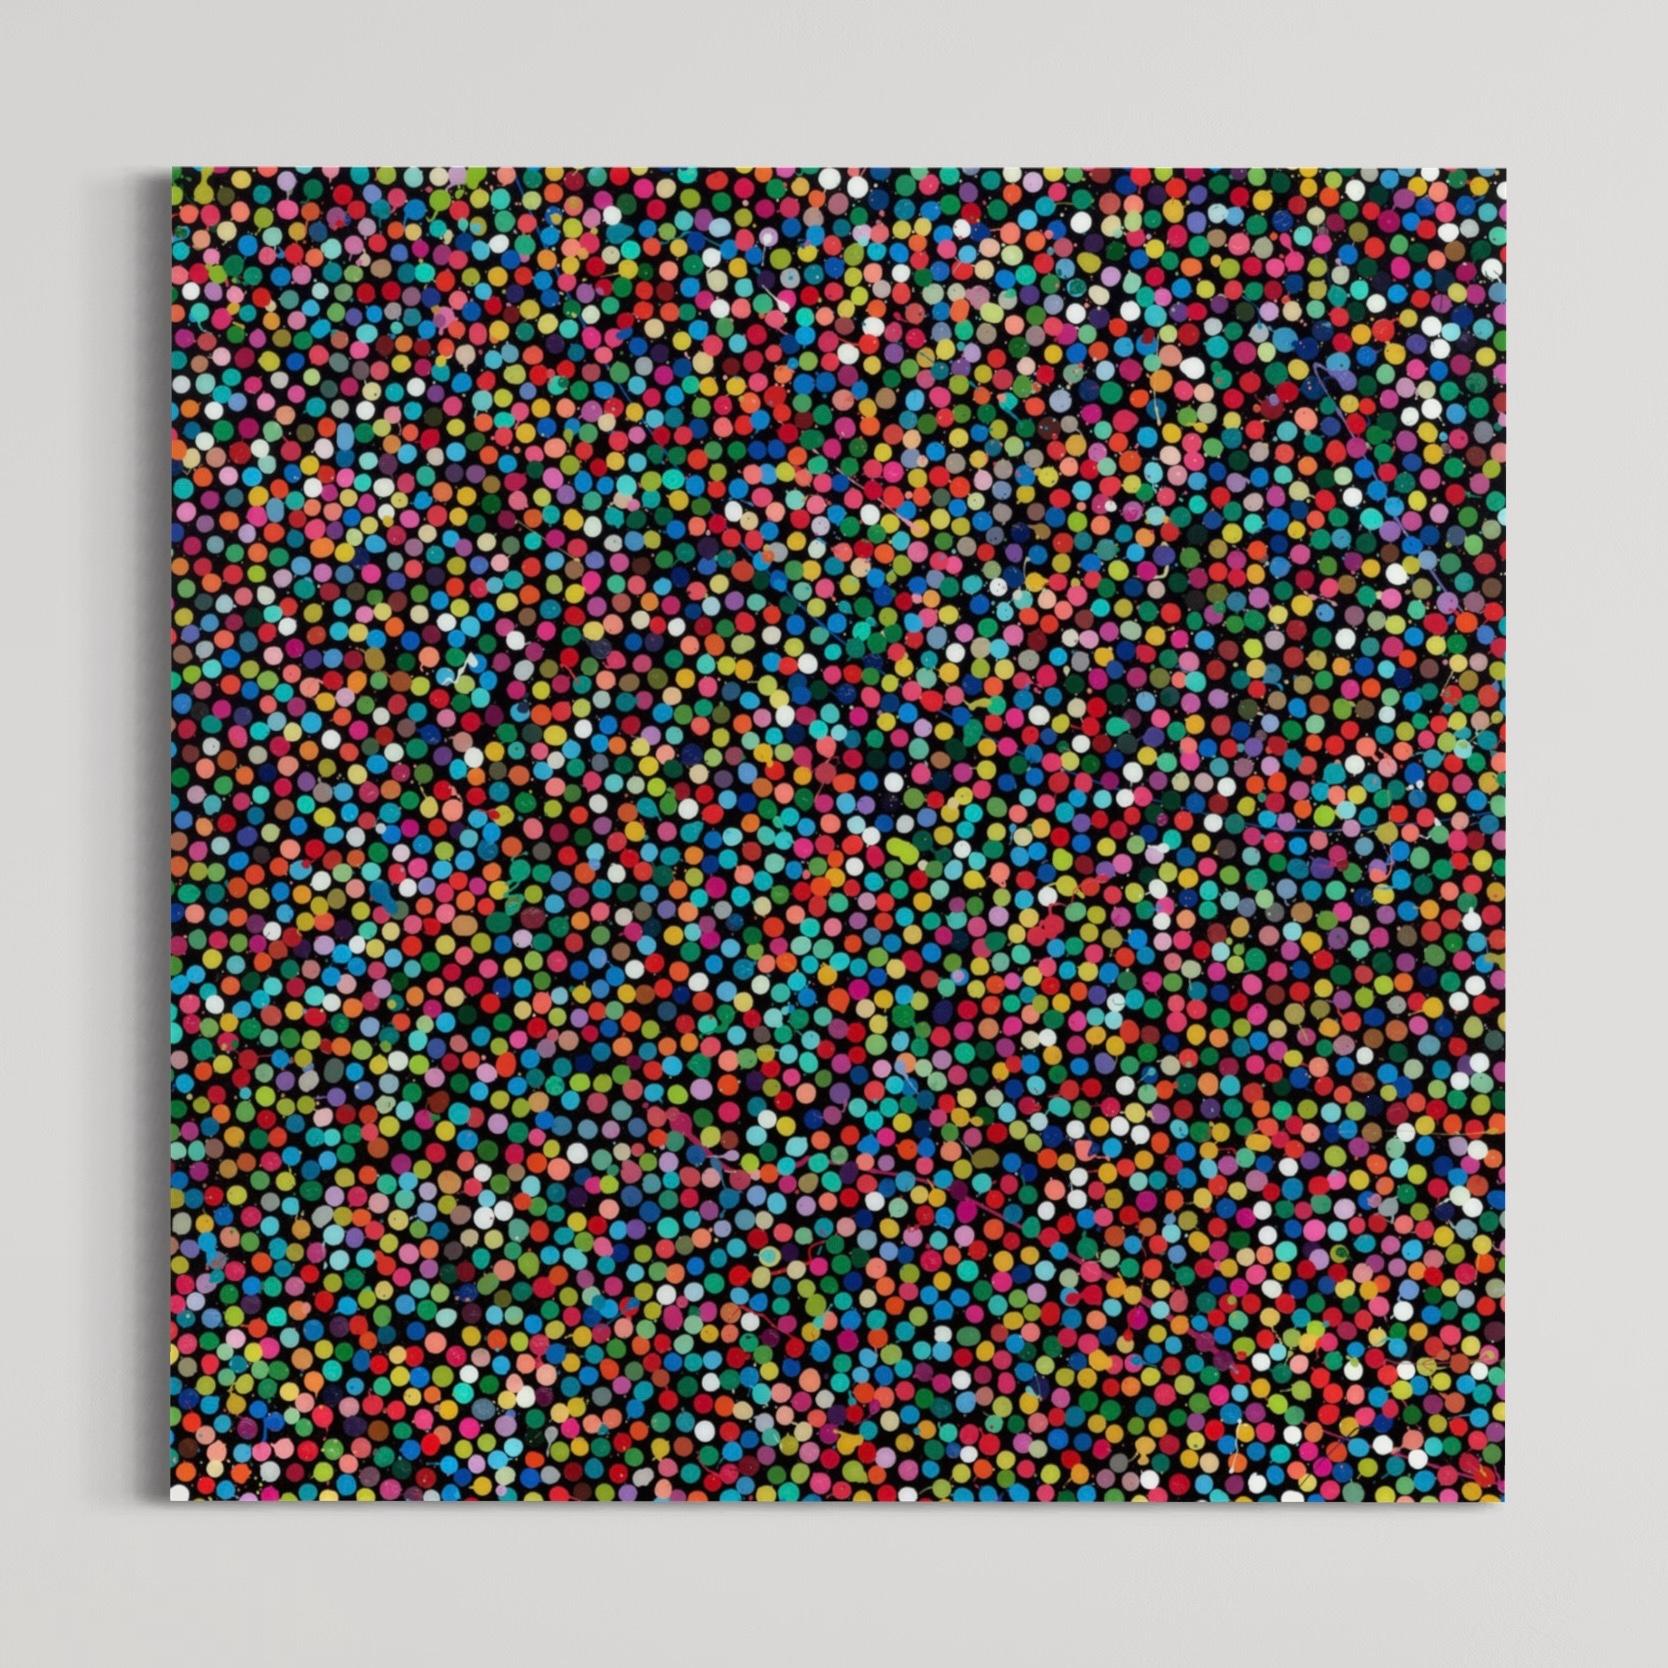 damien hirst most expensive work